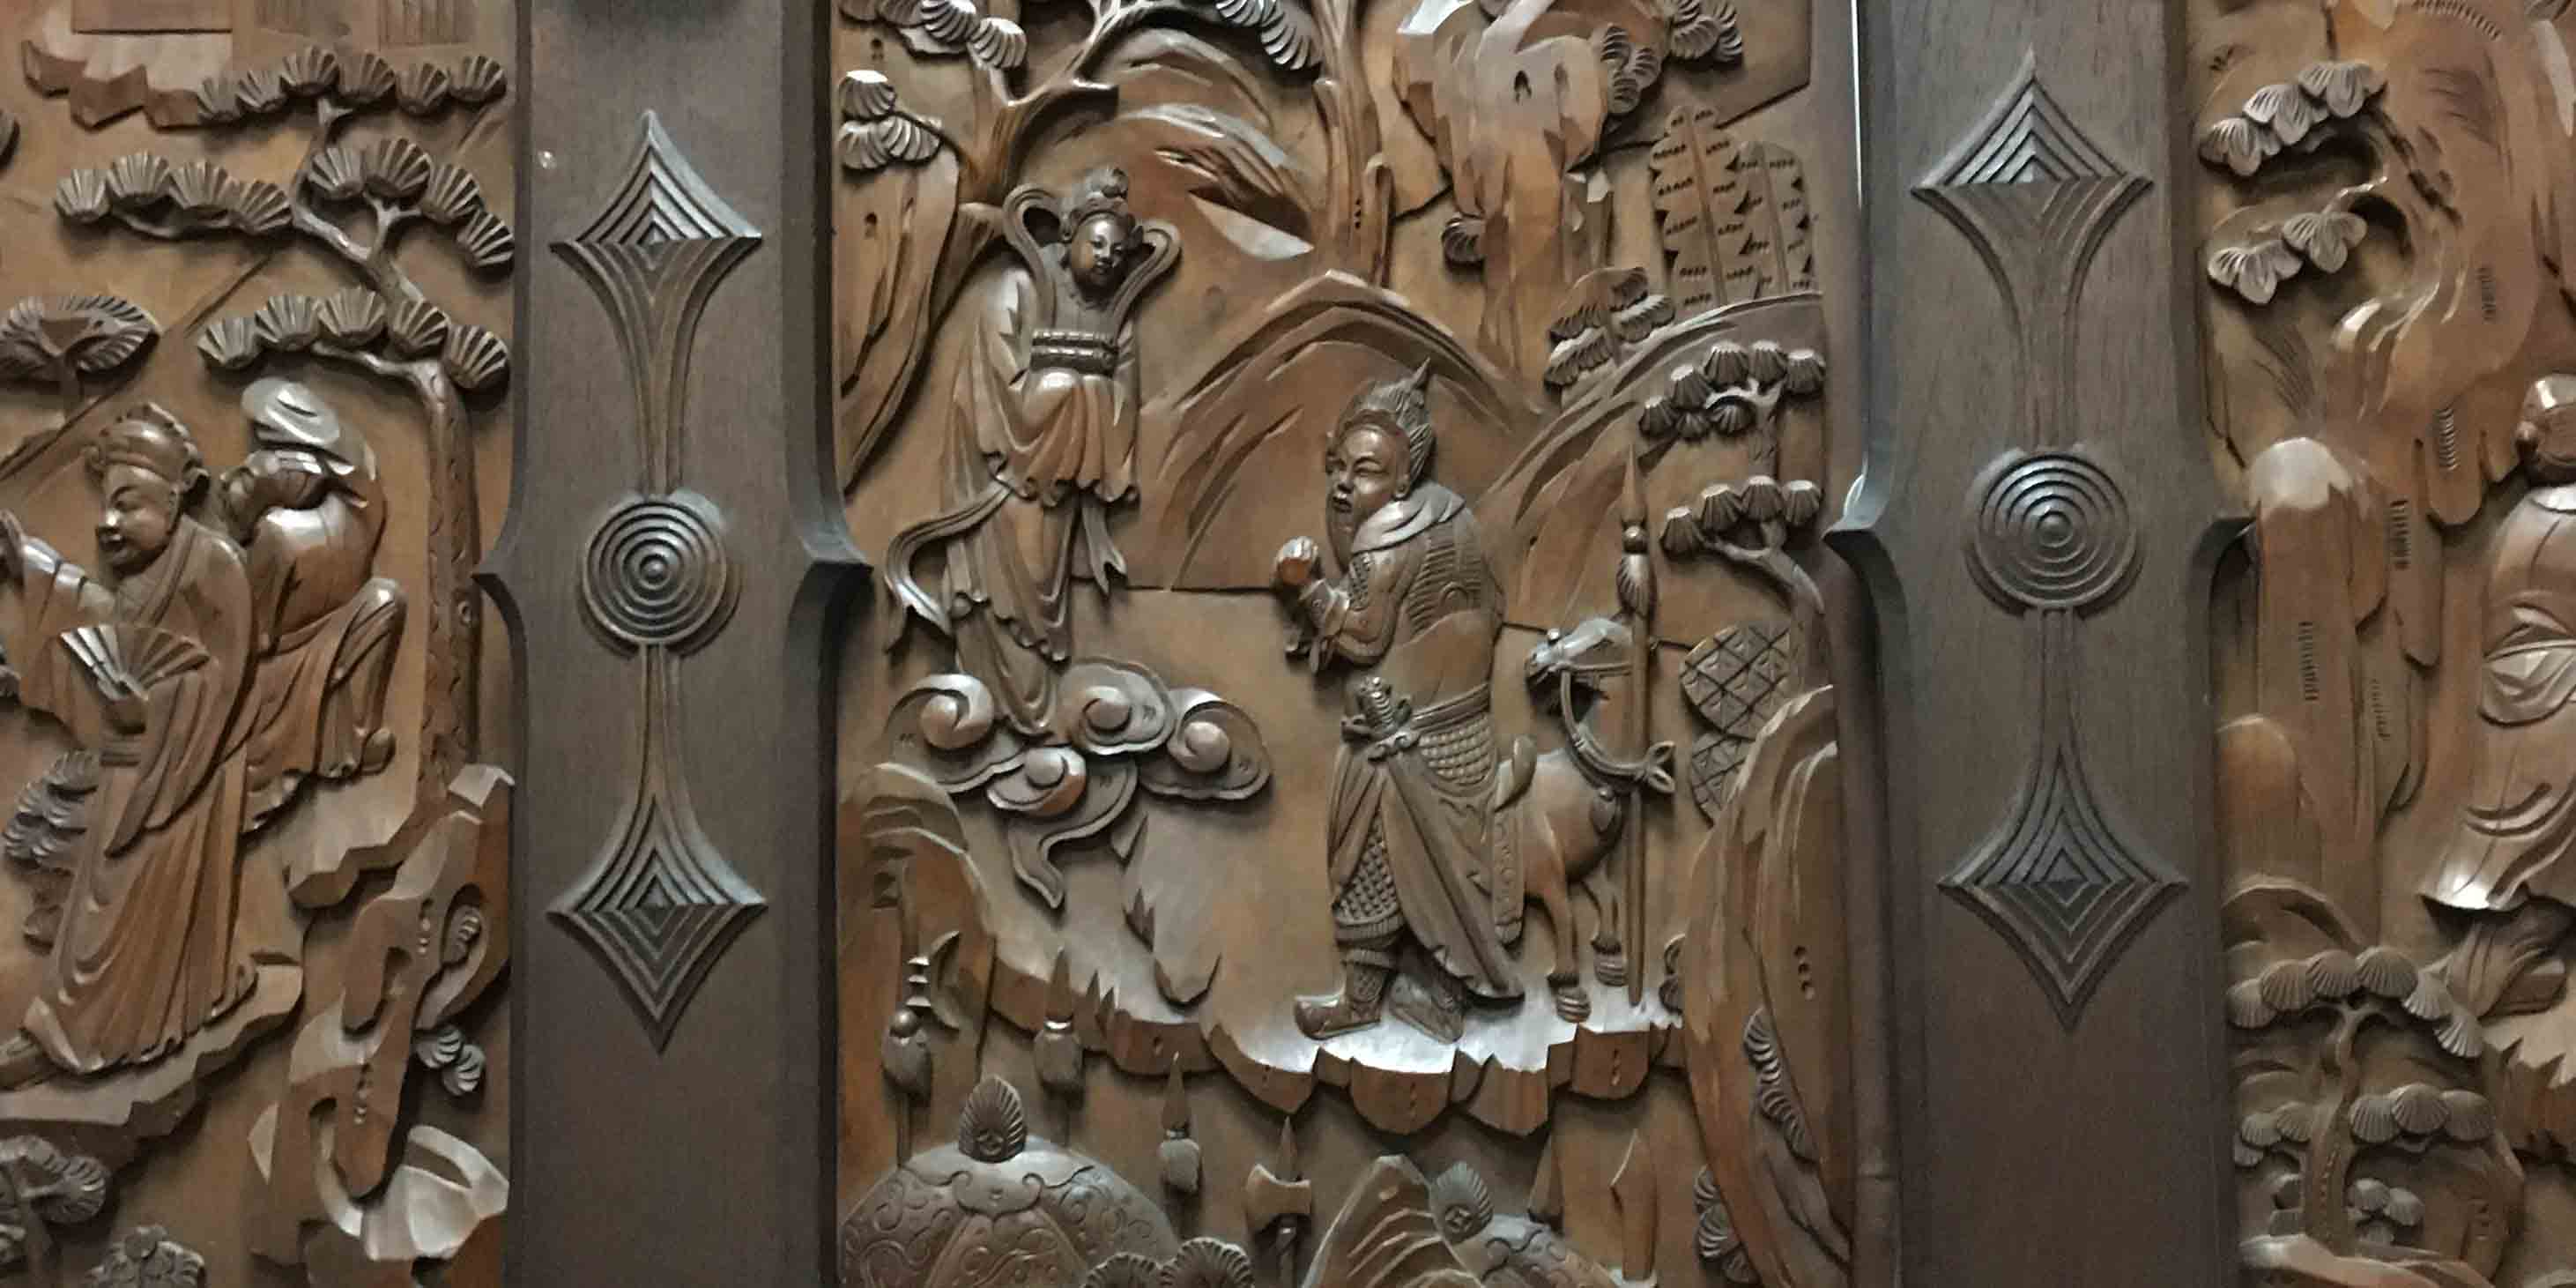 Detail of intricate wood carving, with a man with a sword and a horse depicted